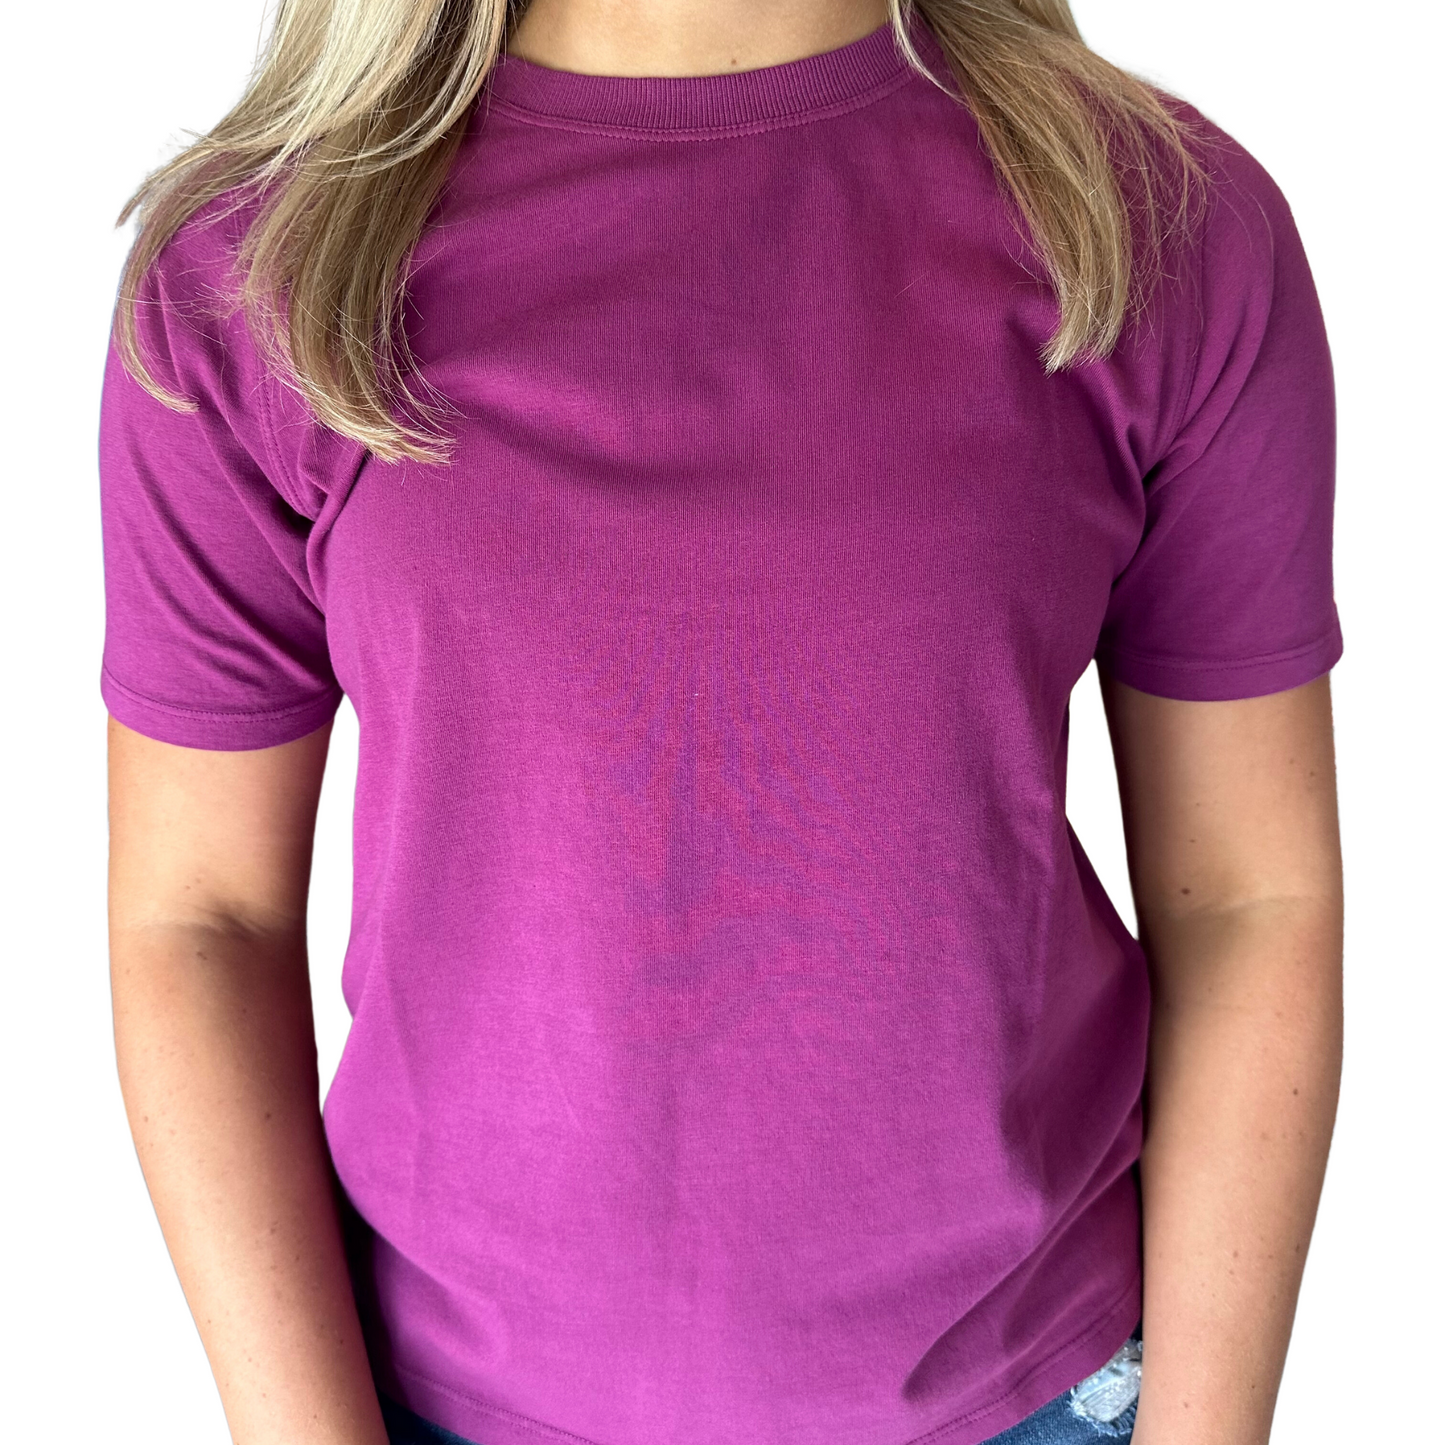 Classic boxy fit tee in Grape color